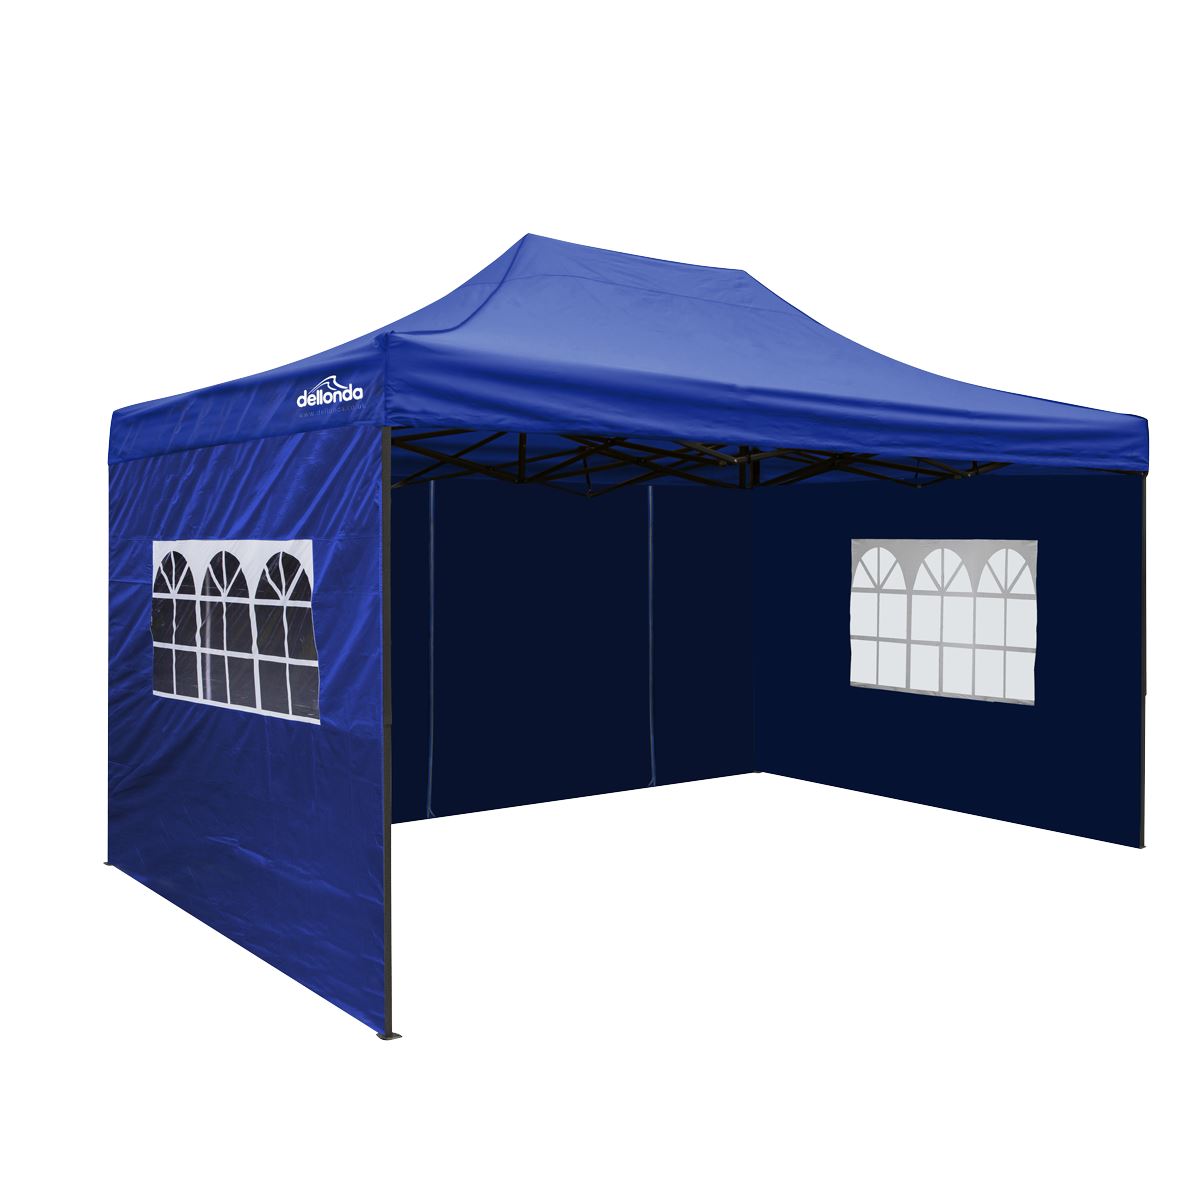 Dellonda Premium 3x4.5m Pop-Up Gazebo & Side Walls, PVC Coated, Water Resistant Fabric with Carry Bag, Rope, Stakes & Weight Bags - Blue